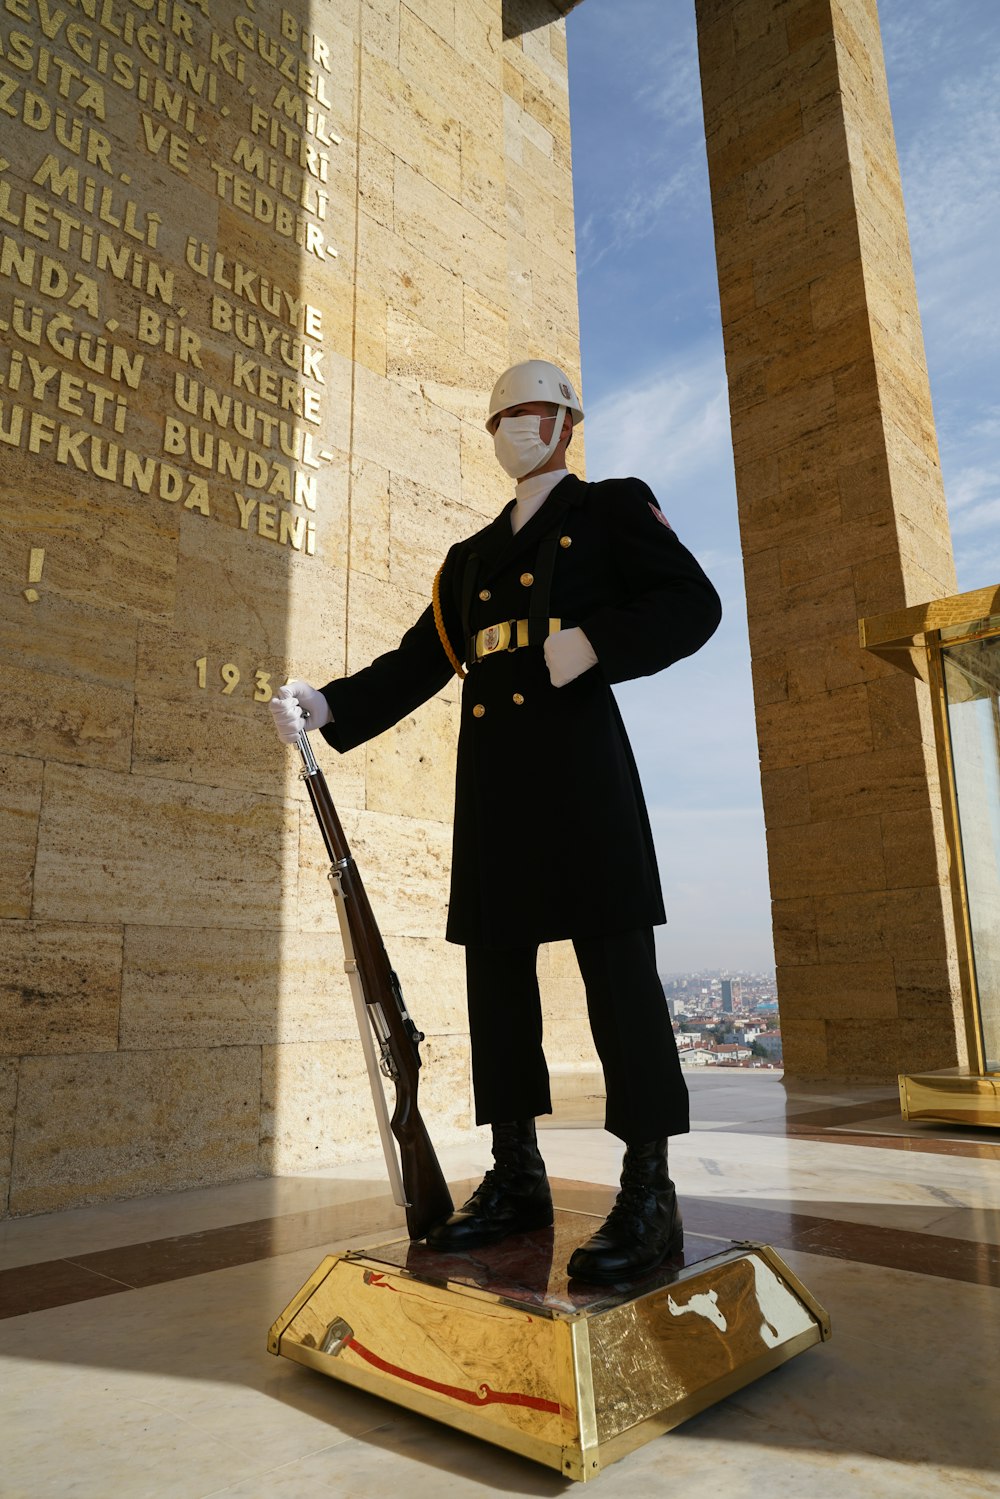 a statue of a man in uniform holding a rifle